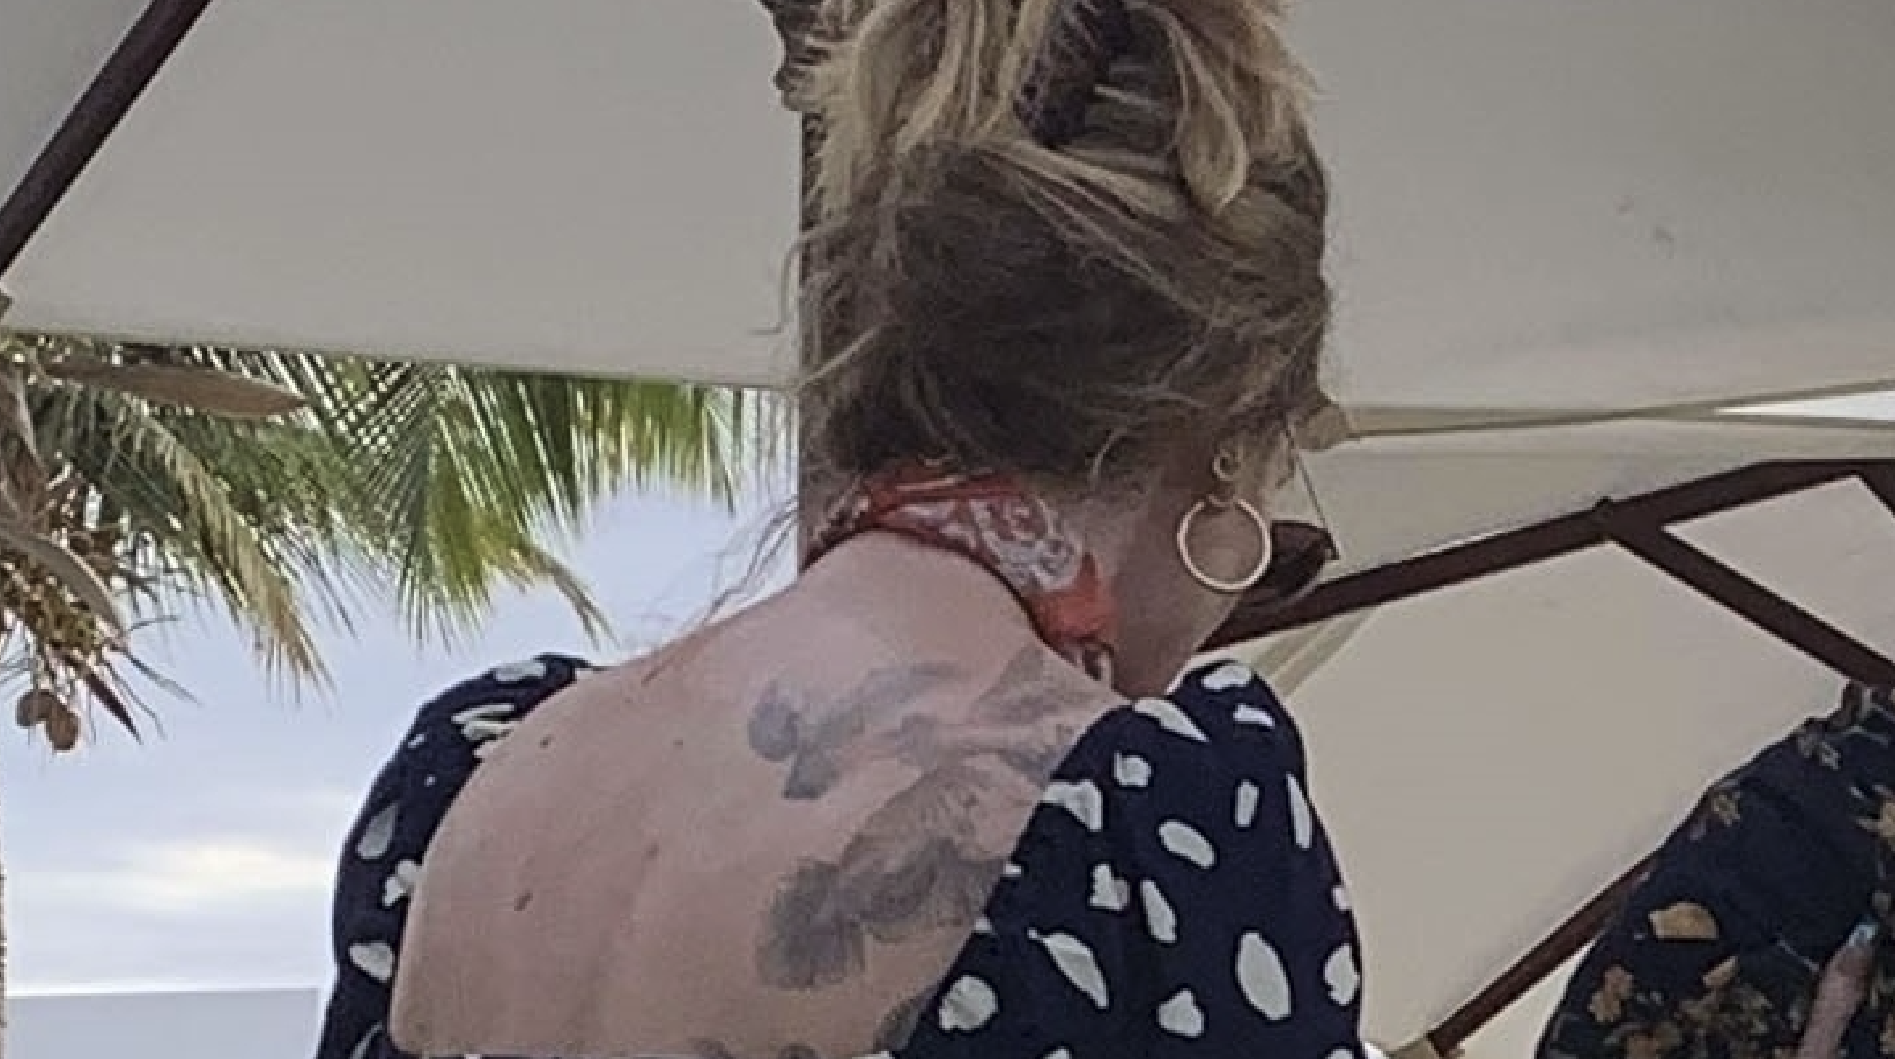 Adele Showed Off Her Massive Back Tattoo On The Beach In Anguilla